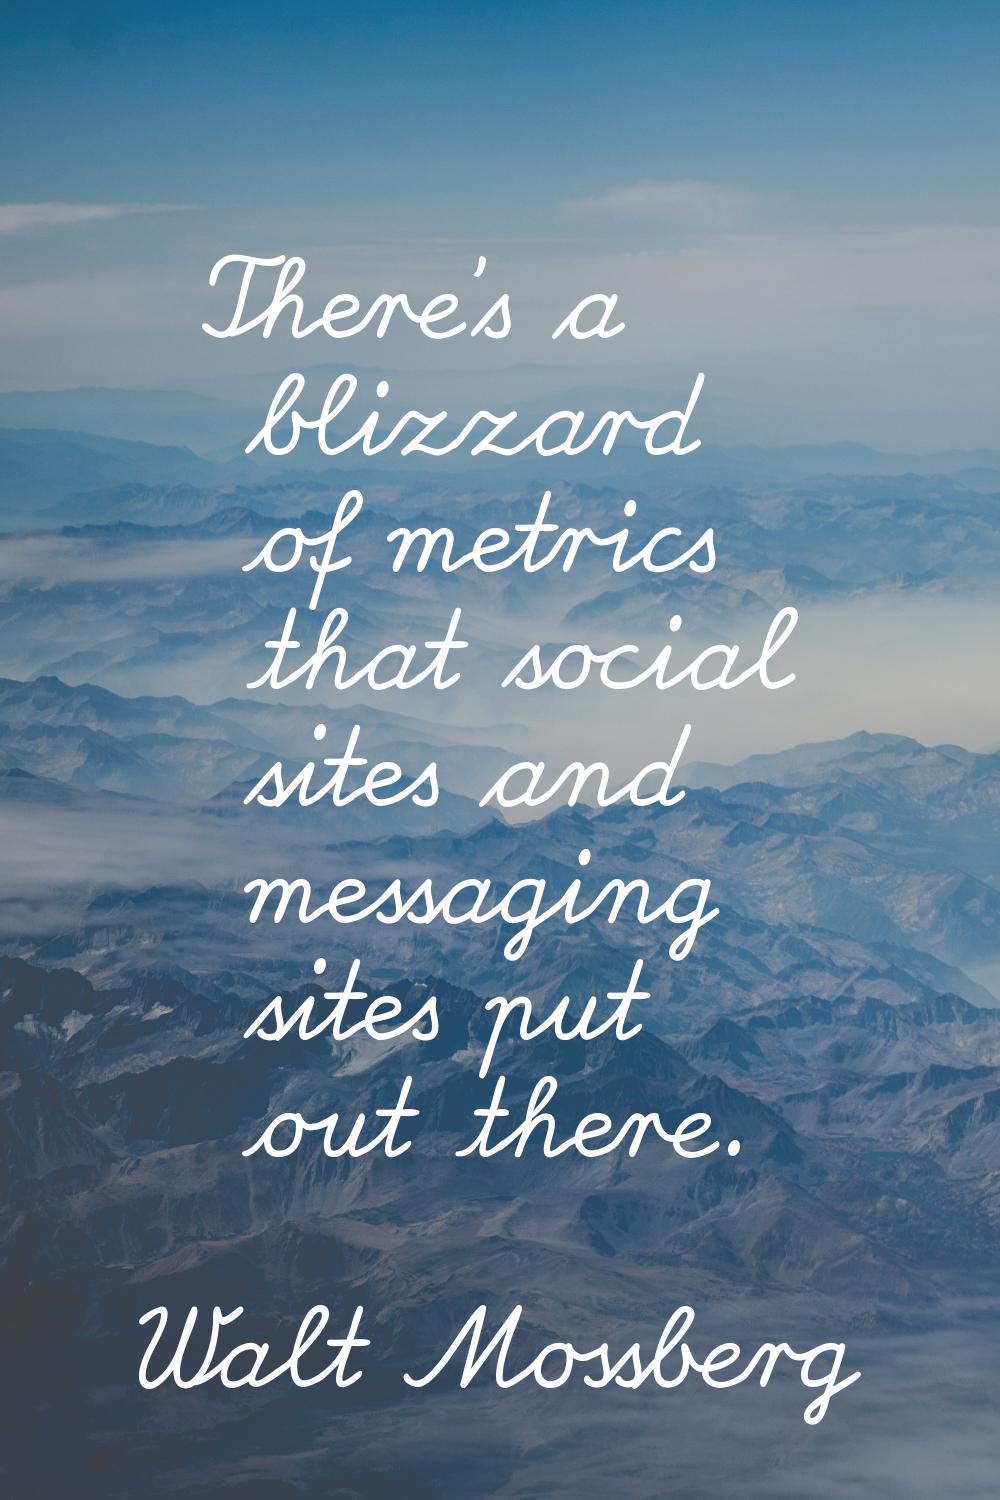 There's a blizzard of metrics that social sites and messaging sites put out there.